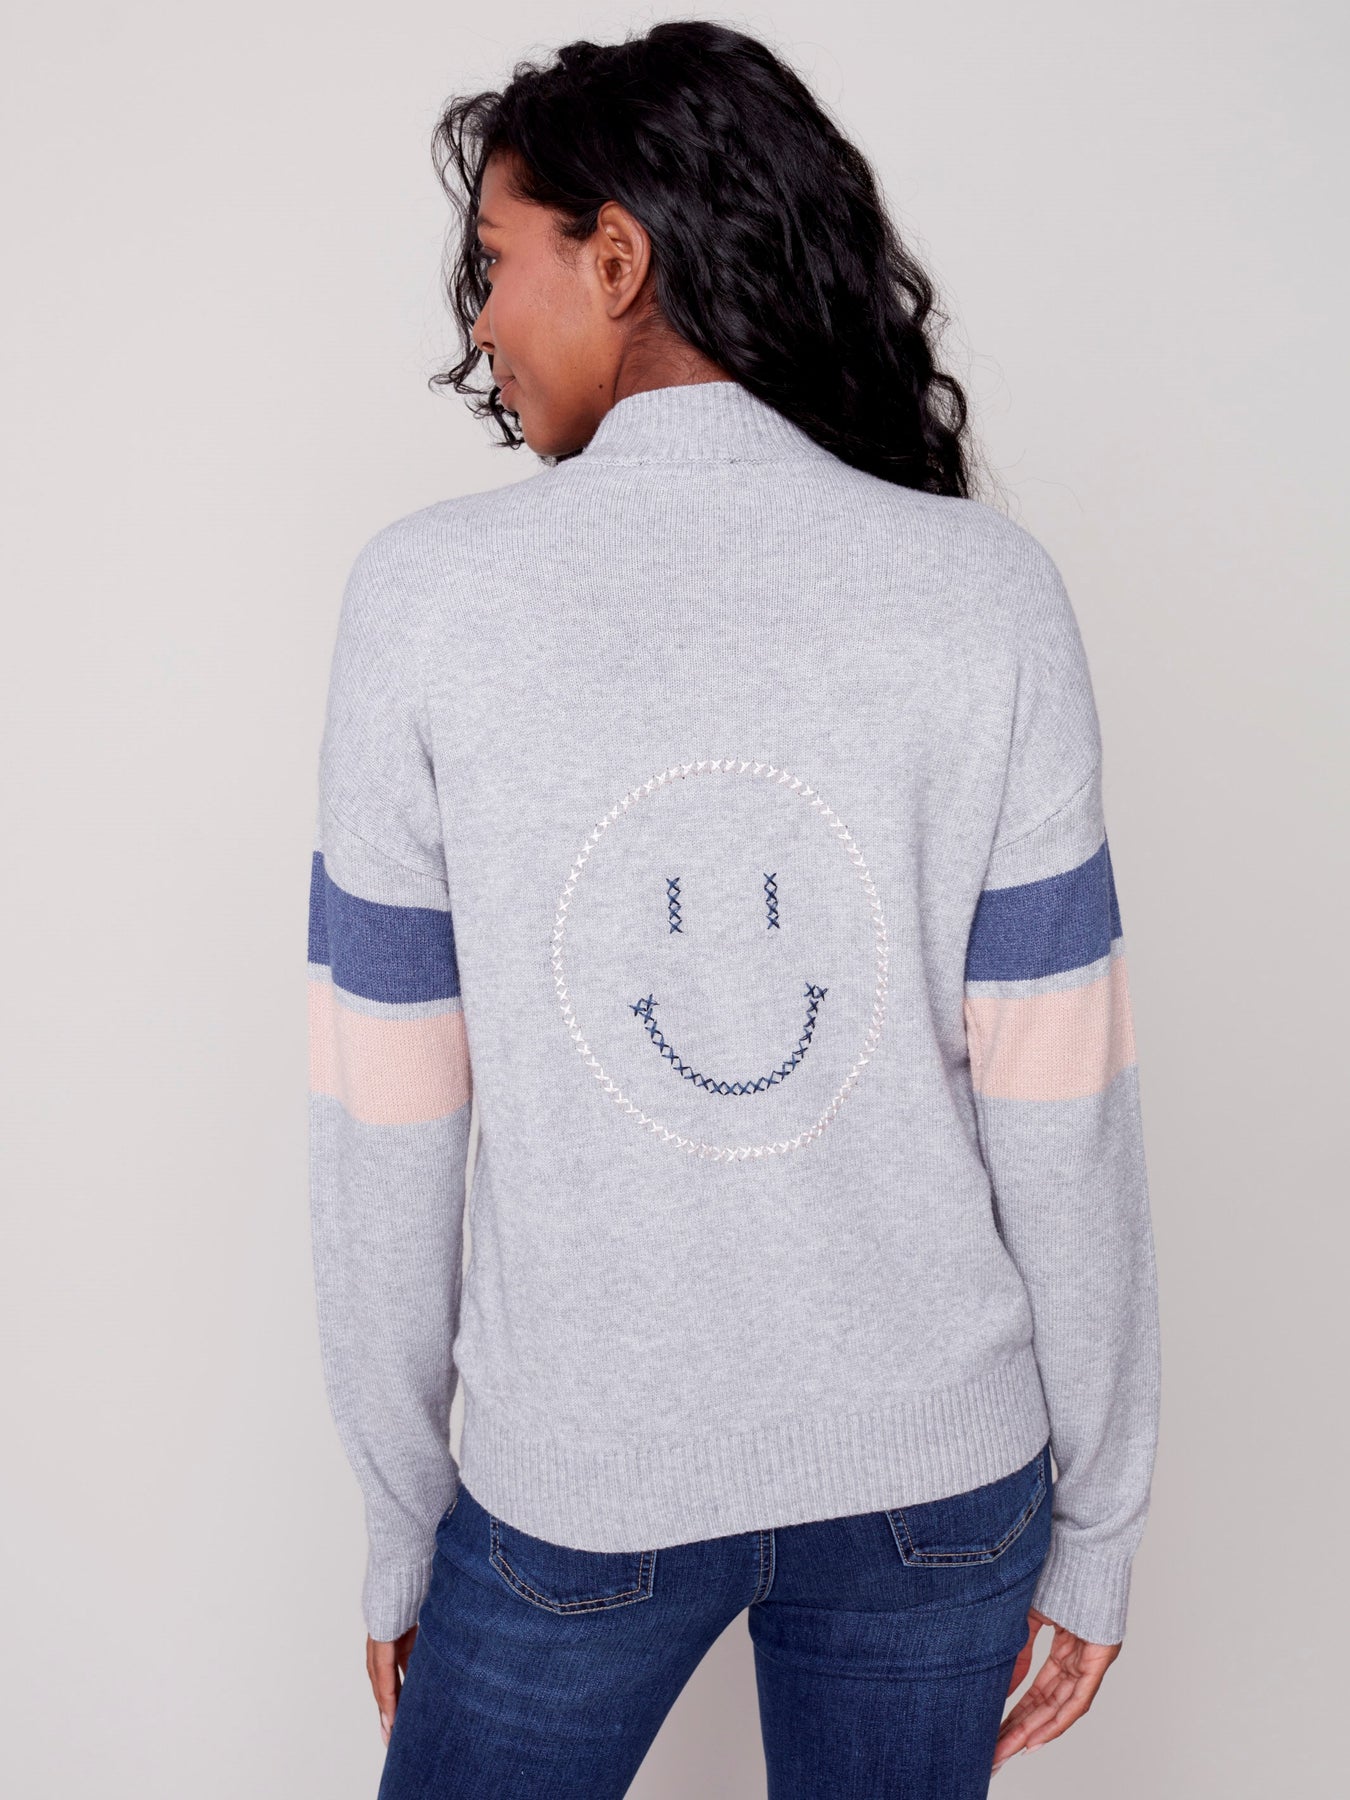 Charlie B Mock Neck Sweater with Smiley Stitching-Gray